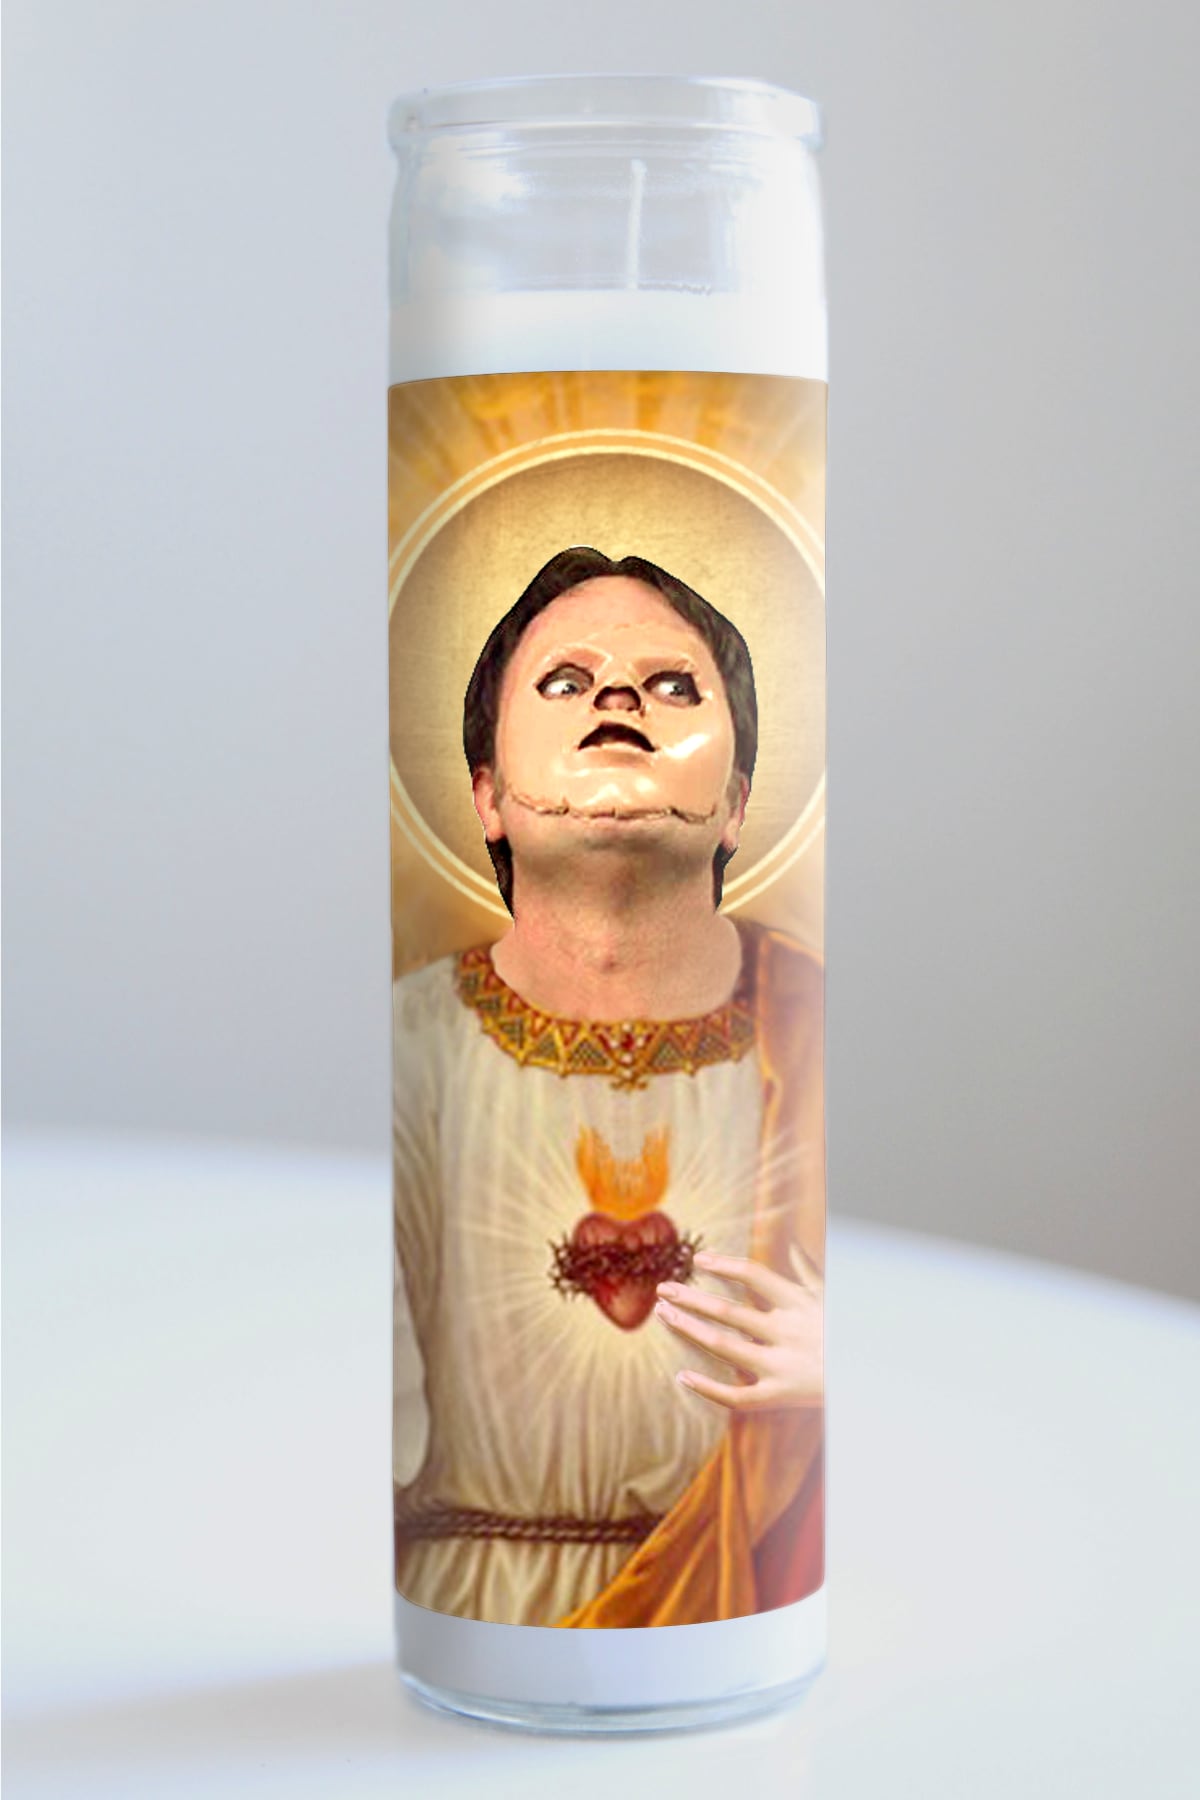 Dwight Schrute (The "CPR Candle –